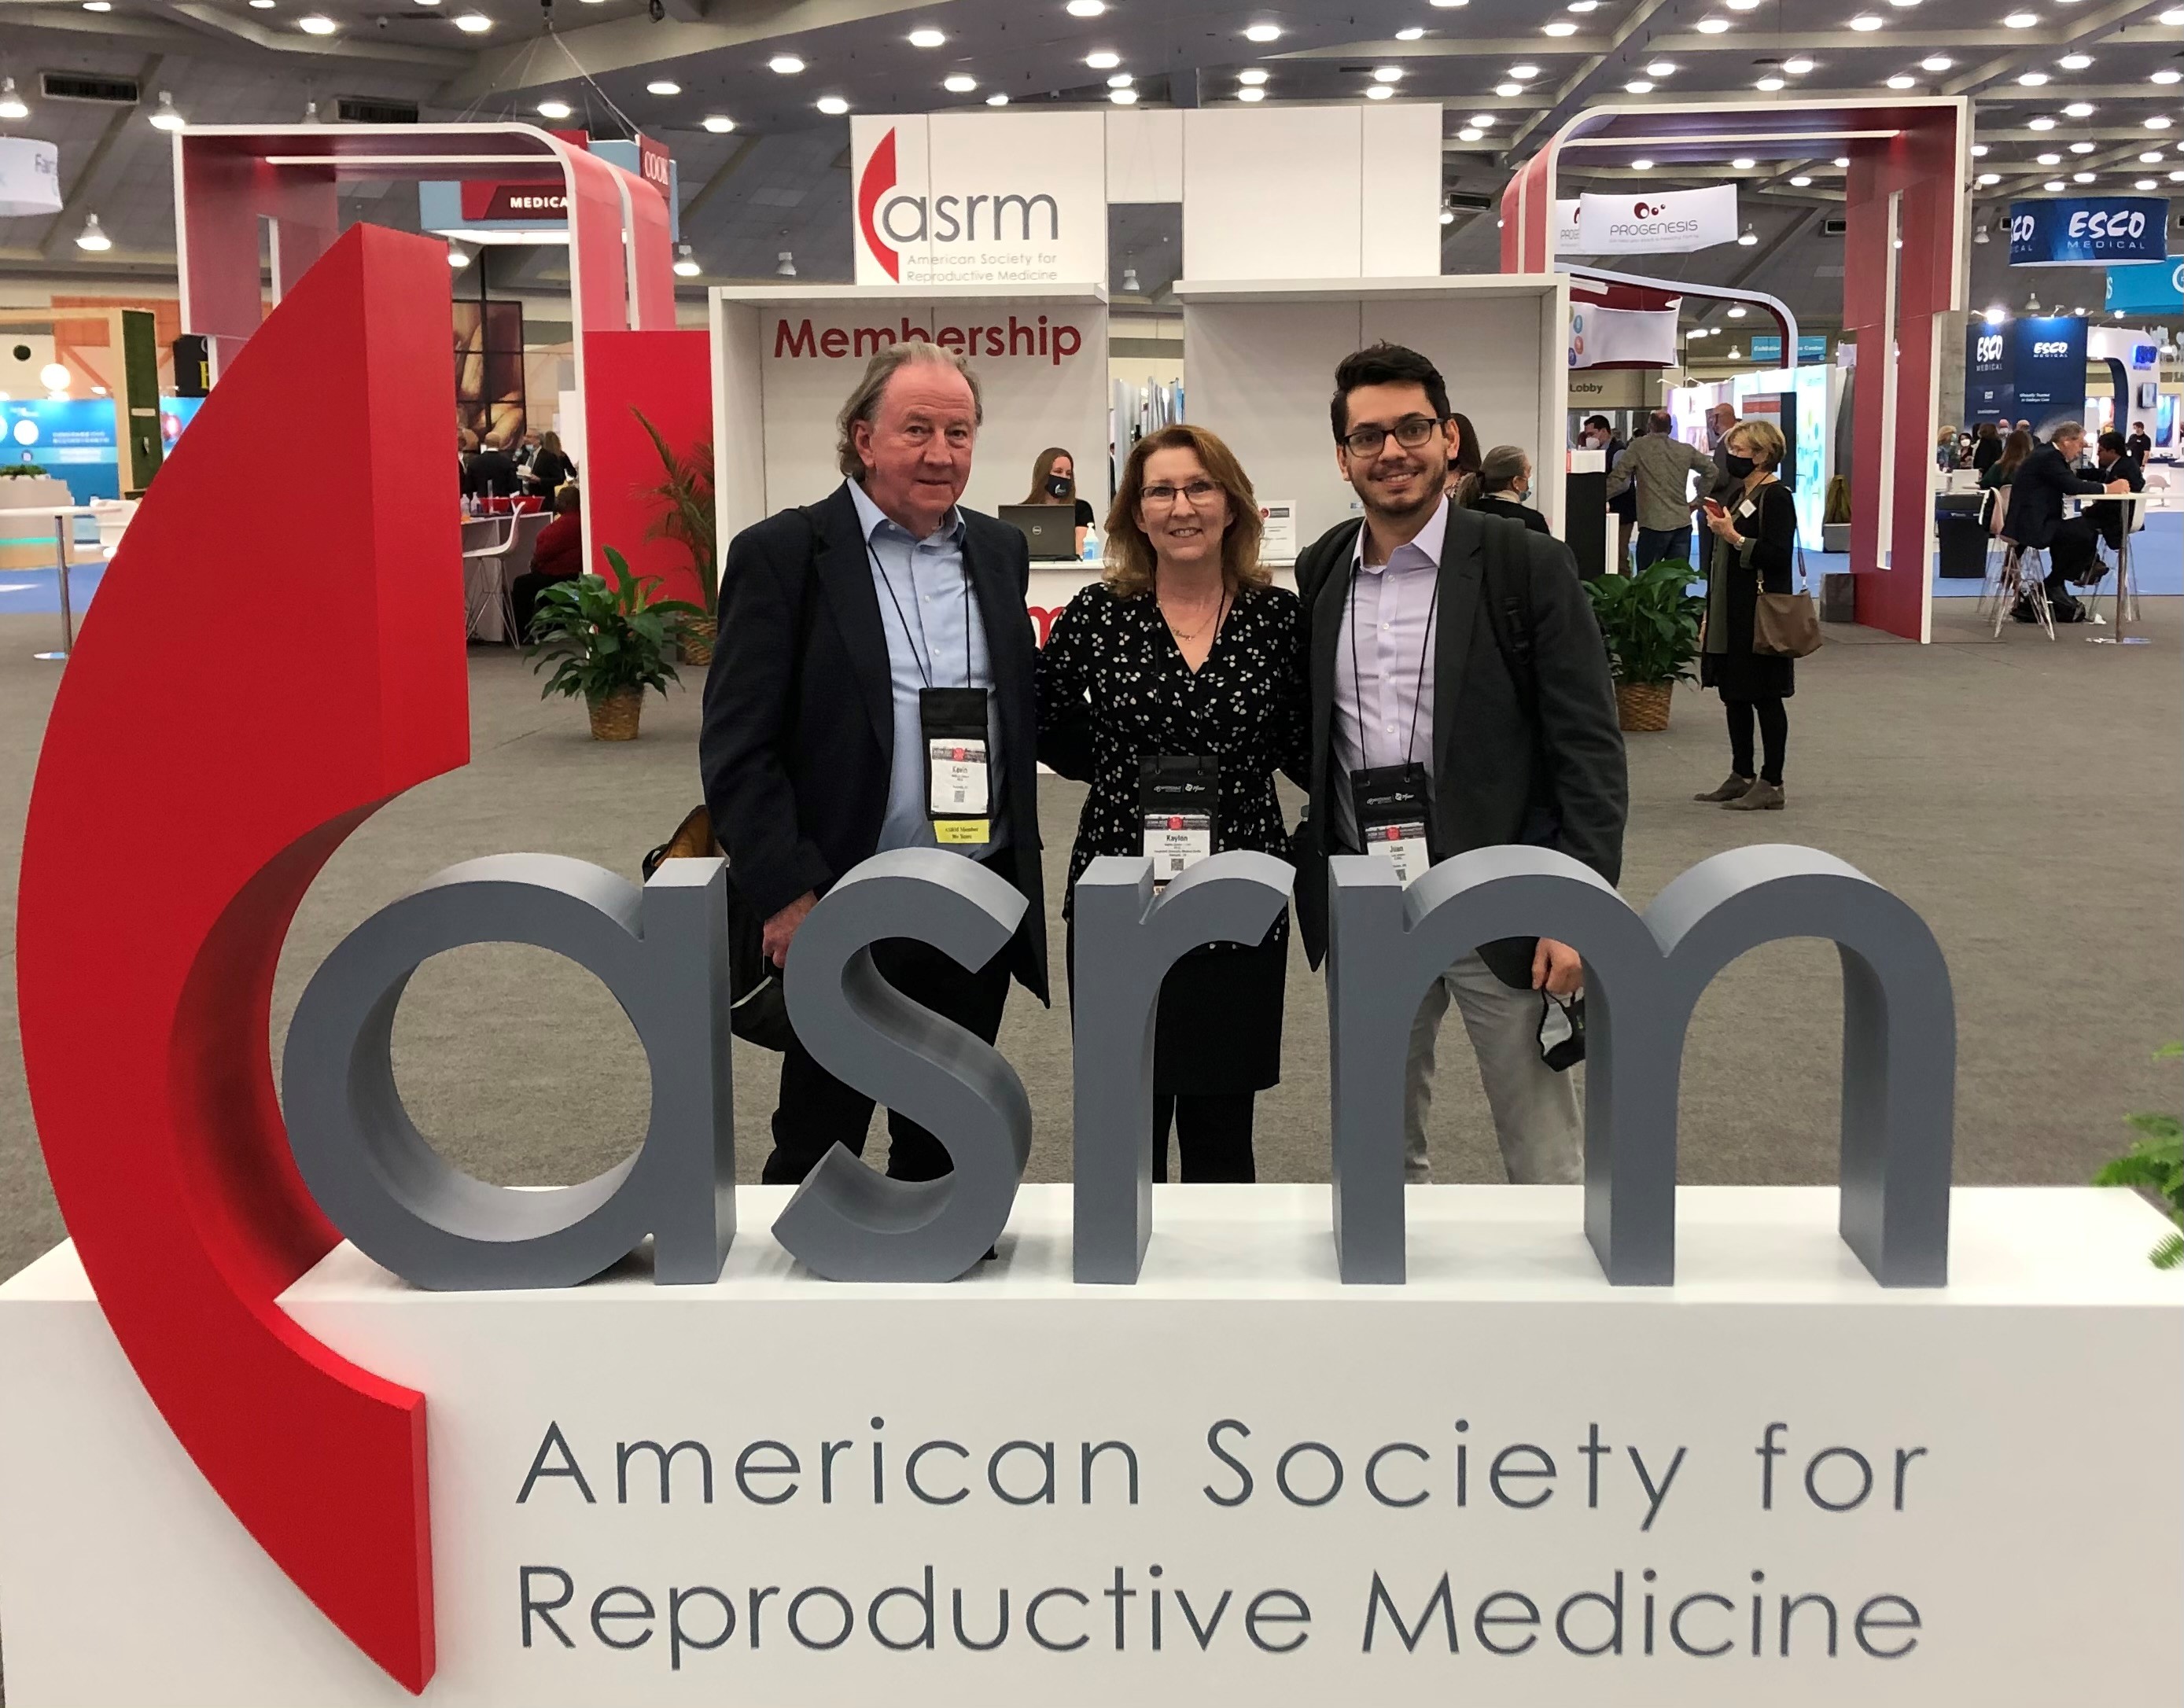 Kaylon (center) with research colleagues Kevin Osteen, PhD (left) and Juan Gnecco, PhD (right) at the annual conference of the American Society for Reproductive Medicine in 2021